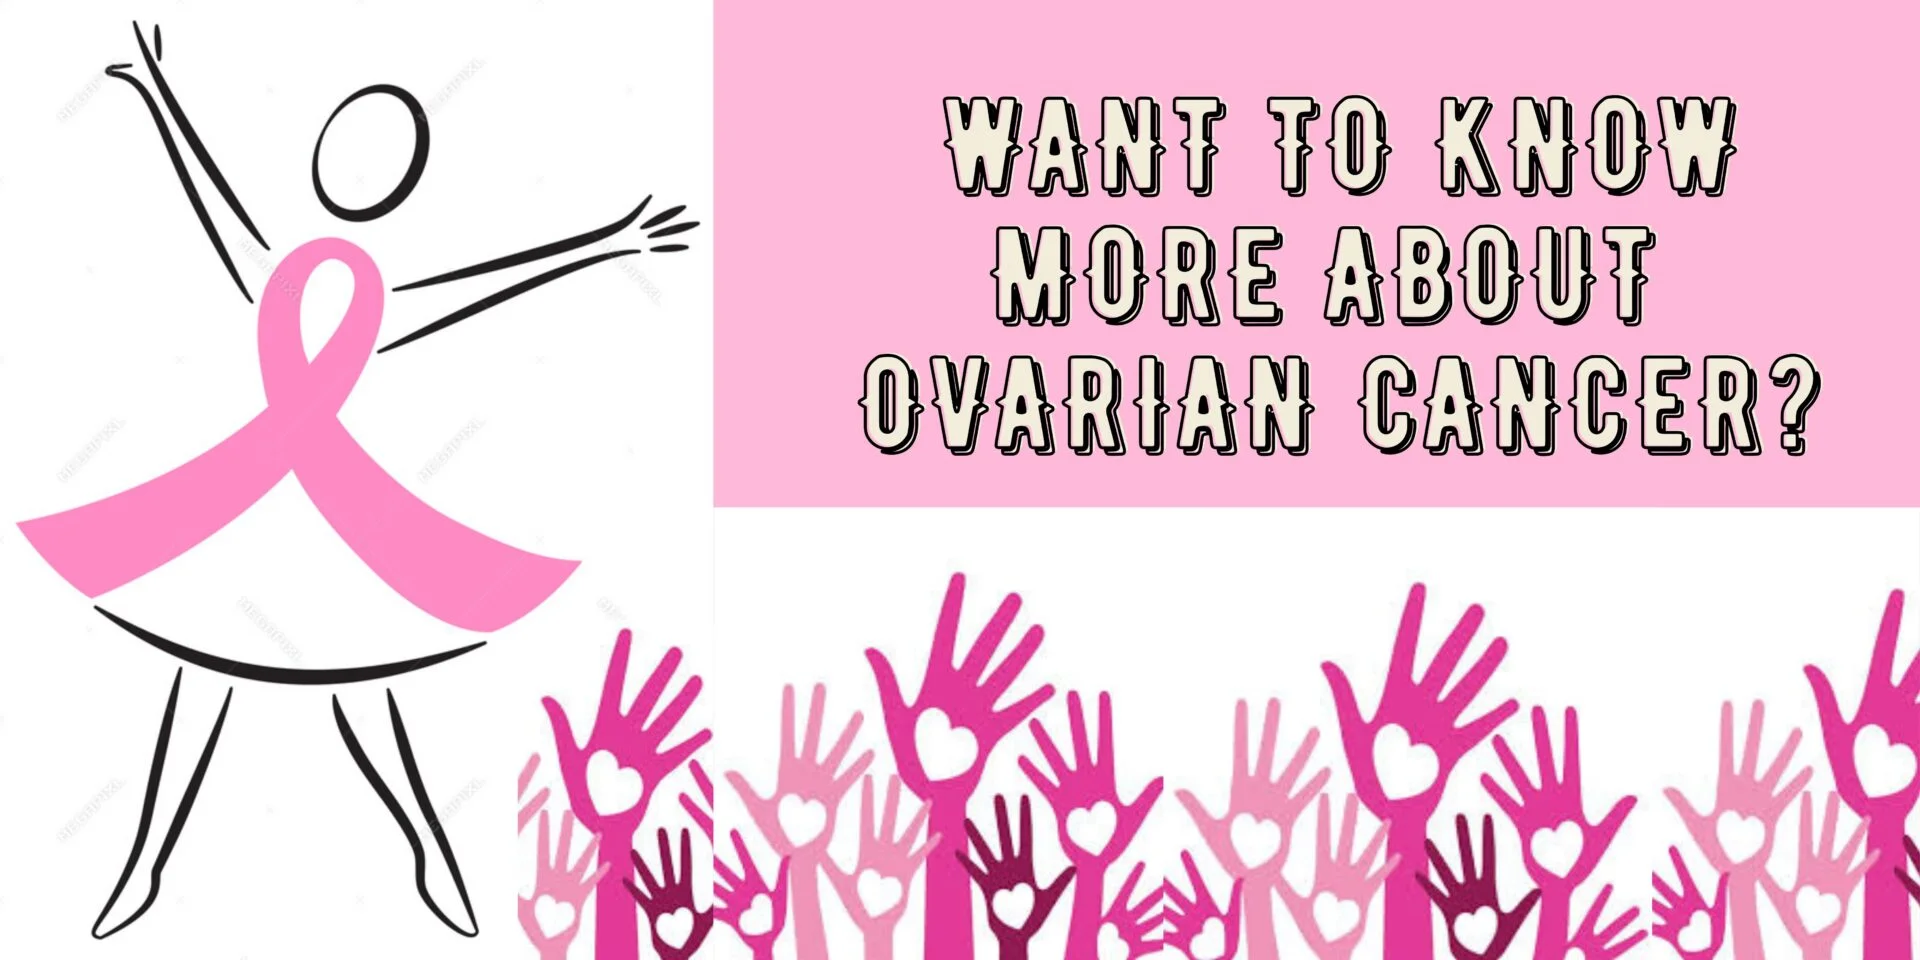 WHAT TO KNOW MORE ABOUT OVARIAN CANCER